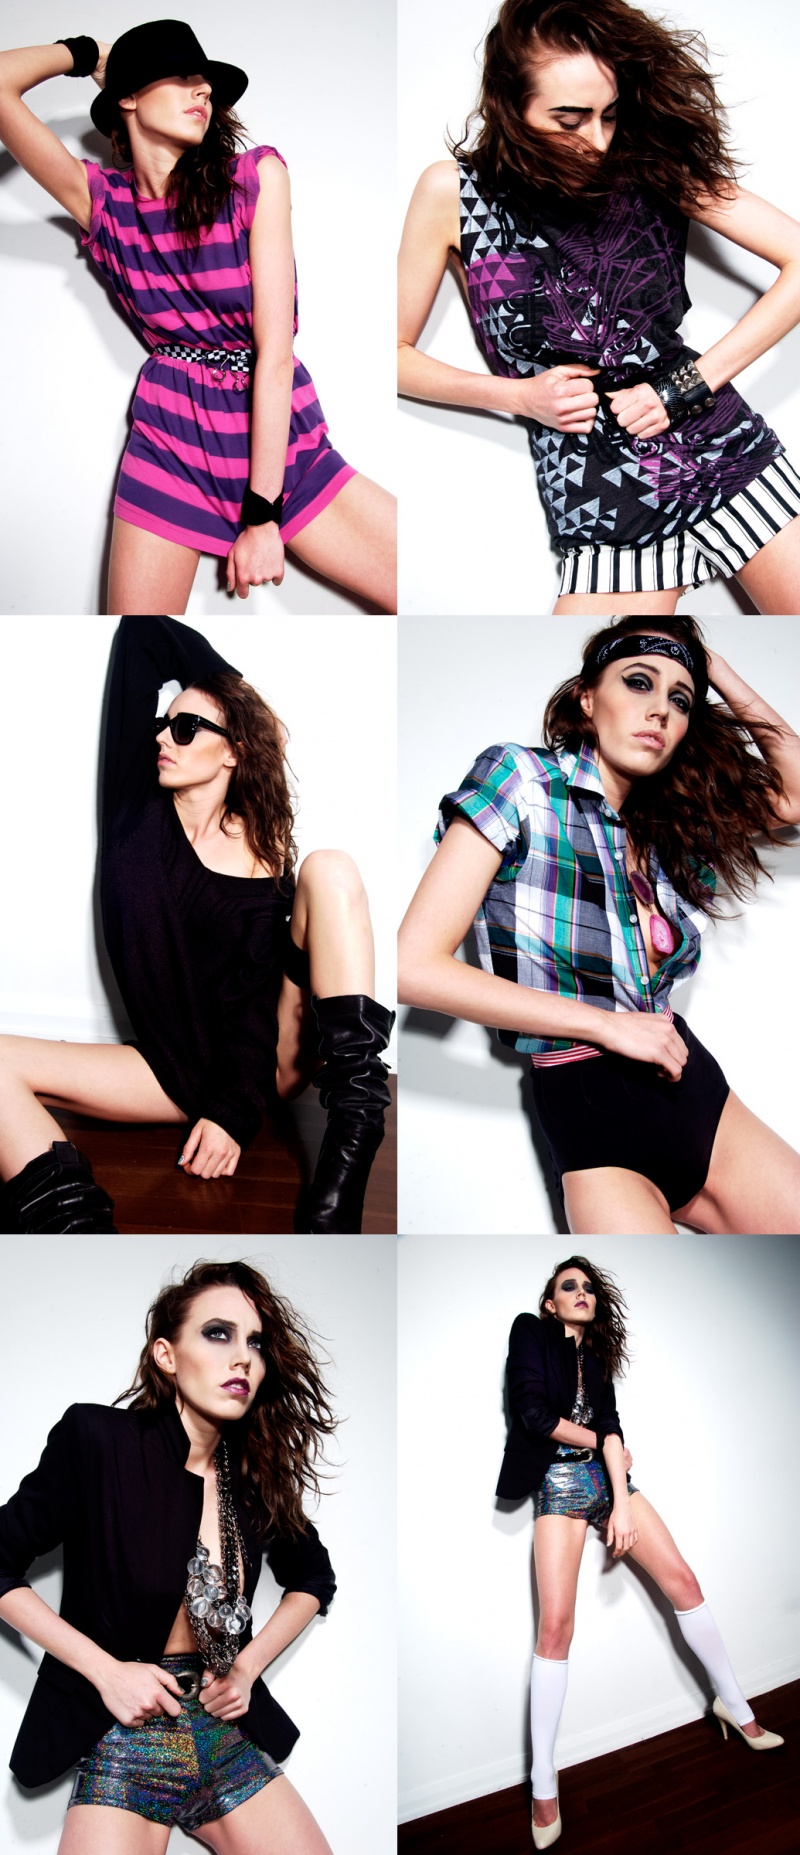 Female model photo shoot of DevonKiley by rickOPIOLA, wardrobe styled by alexis amber, makeup by Le-Makeup